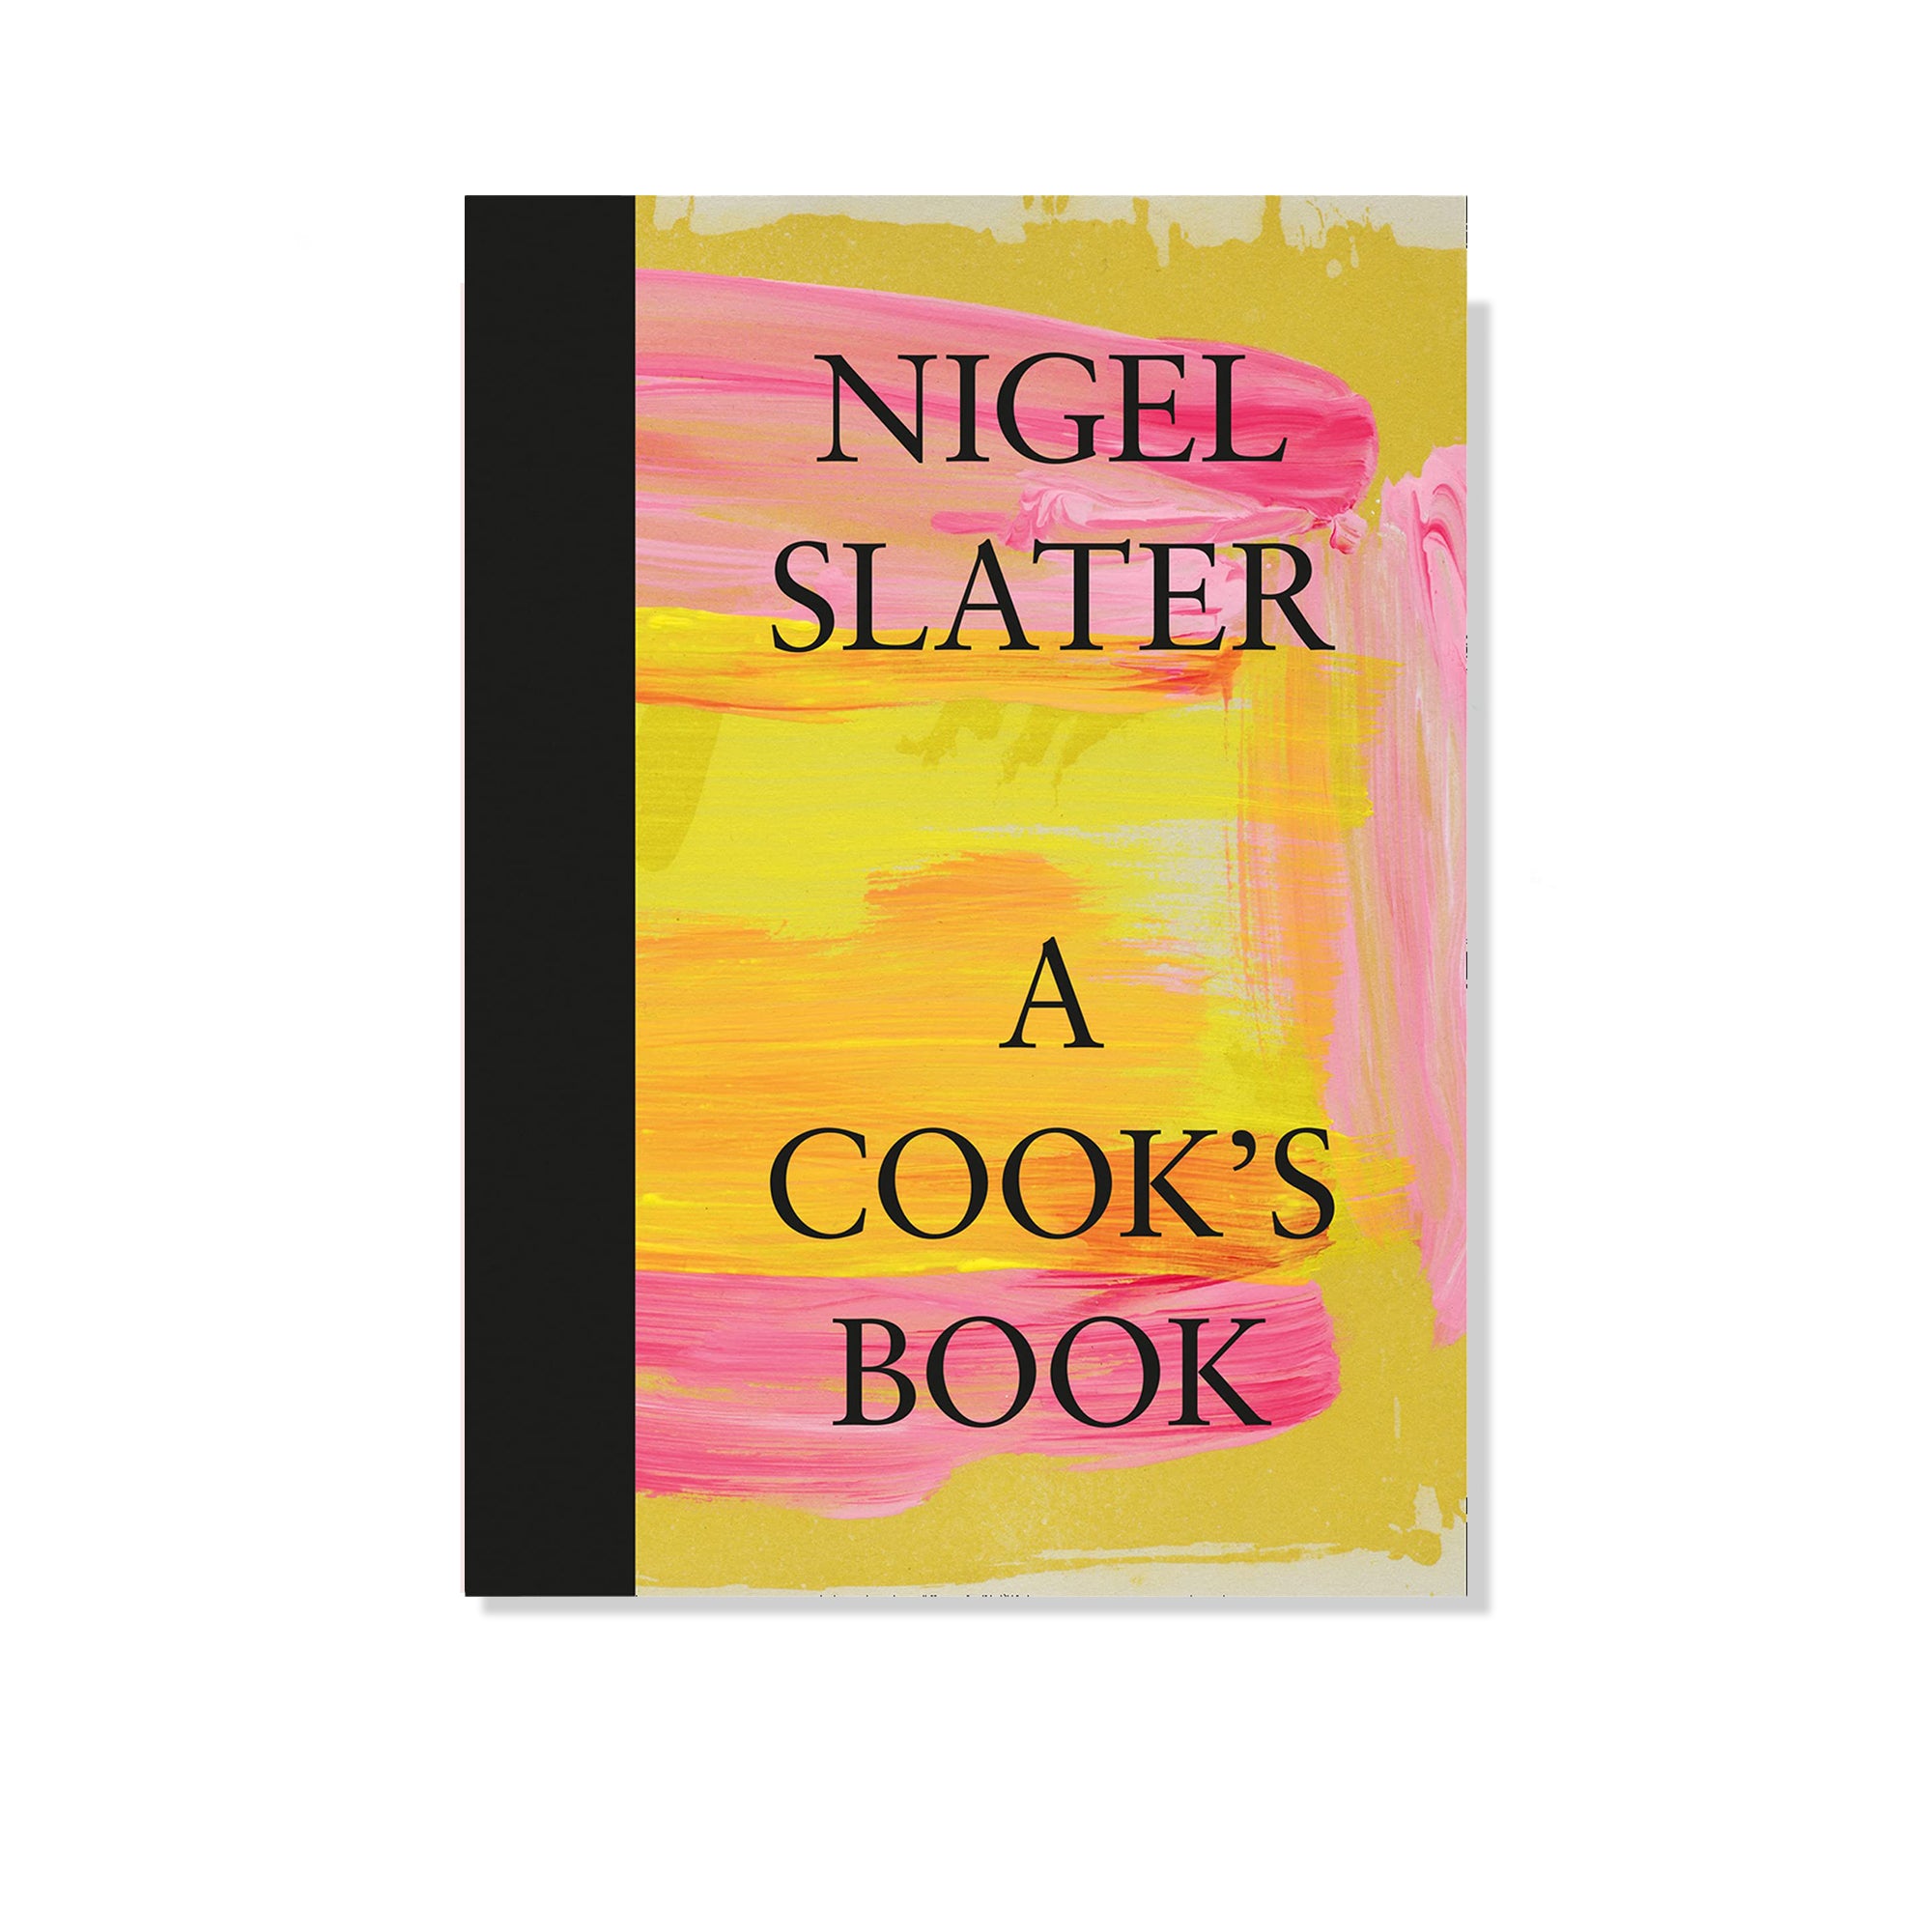 A Cook’s Book: The Essential Nigel Slater with over 200 recipes